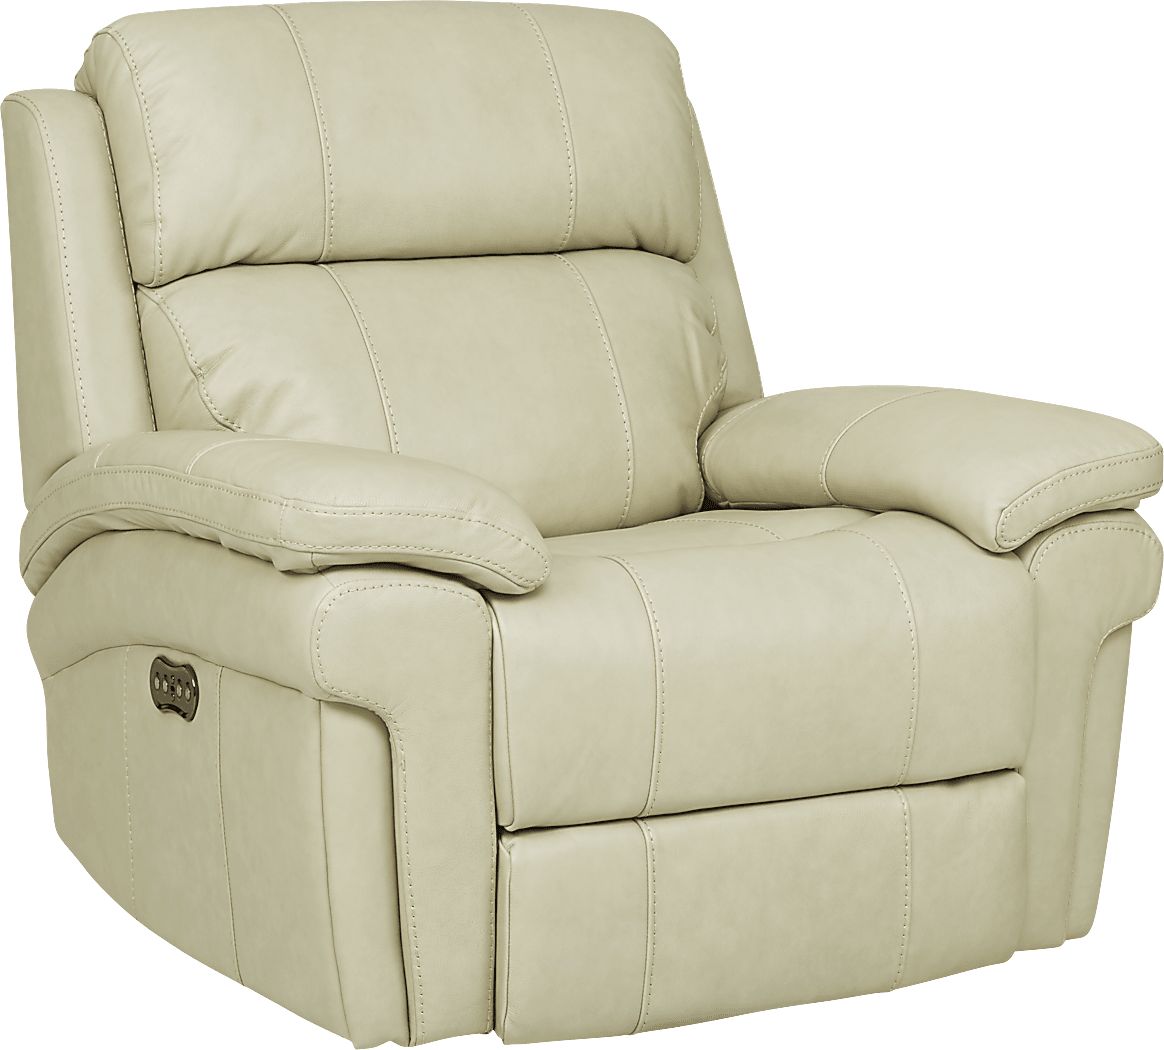 Trevino Place Cream Leather 3 Pc Living Room with Reclining Sofa